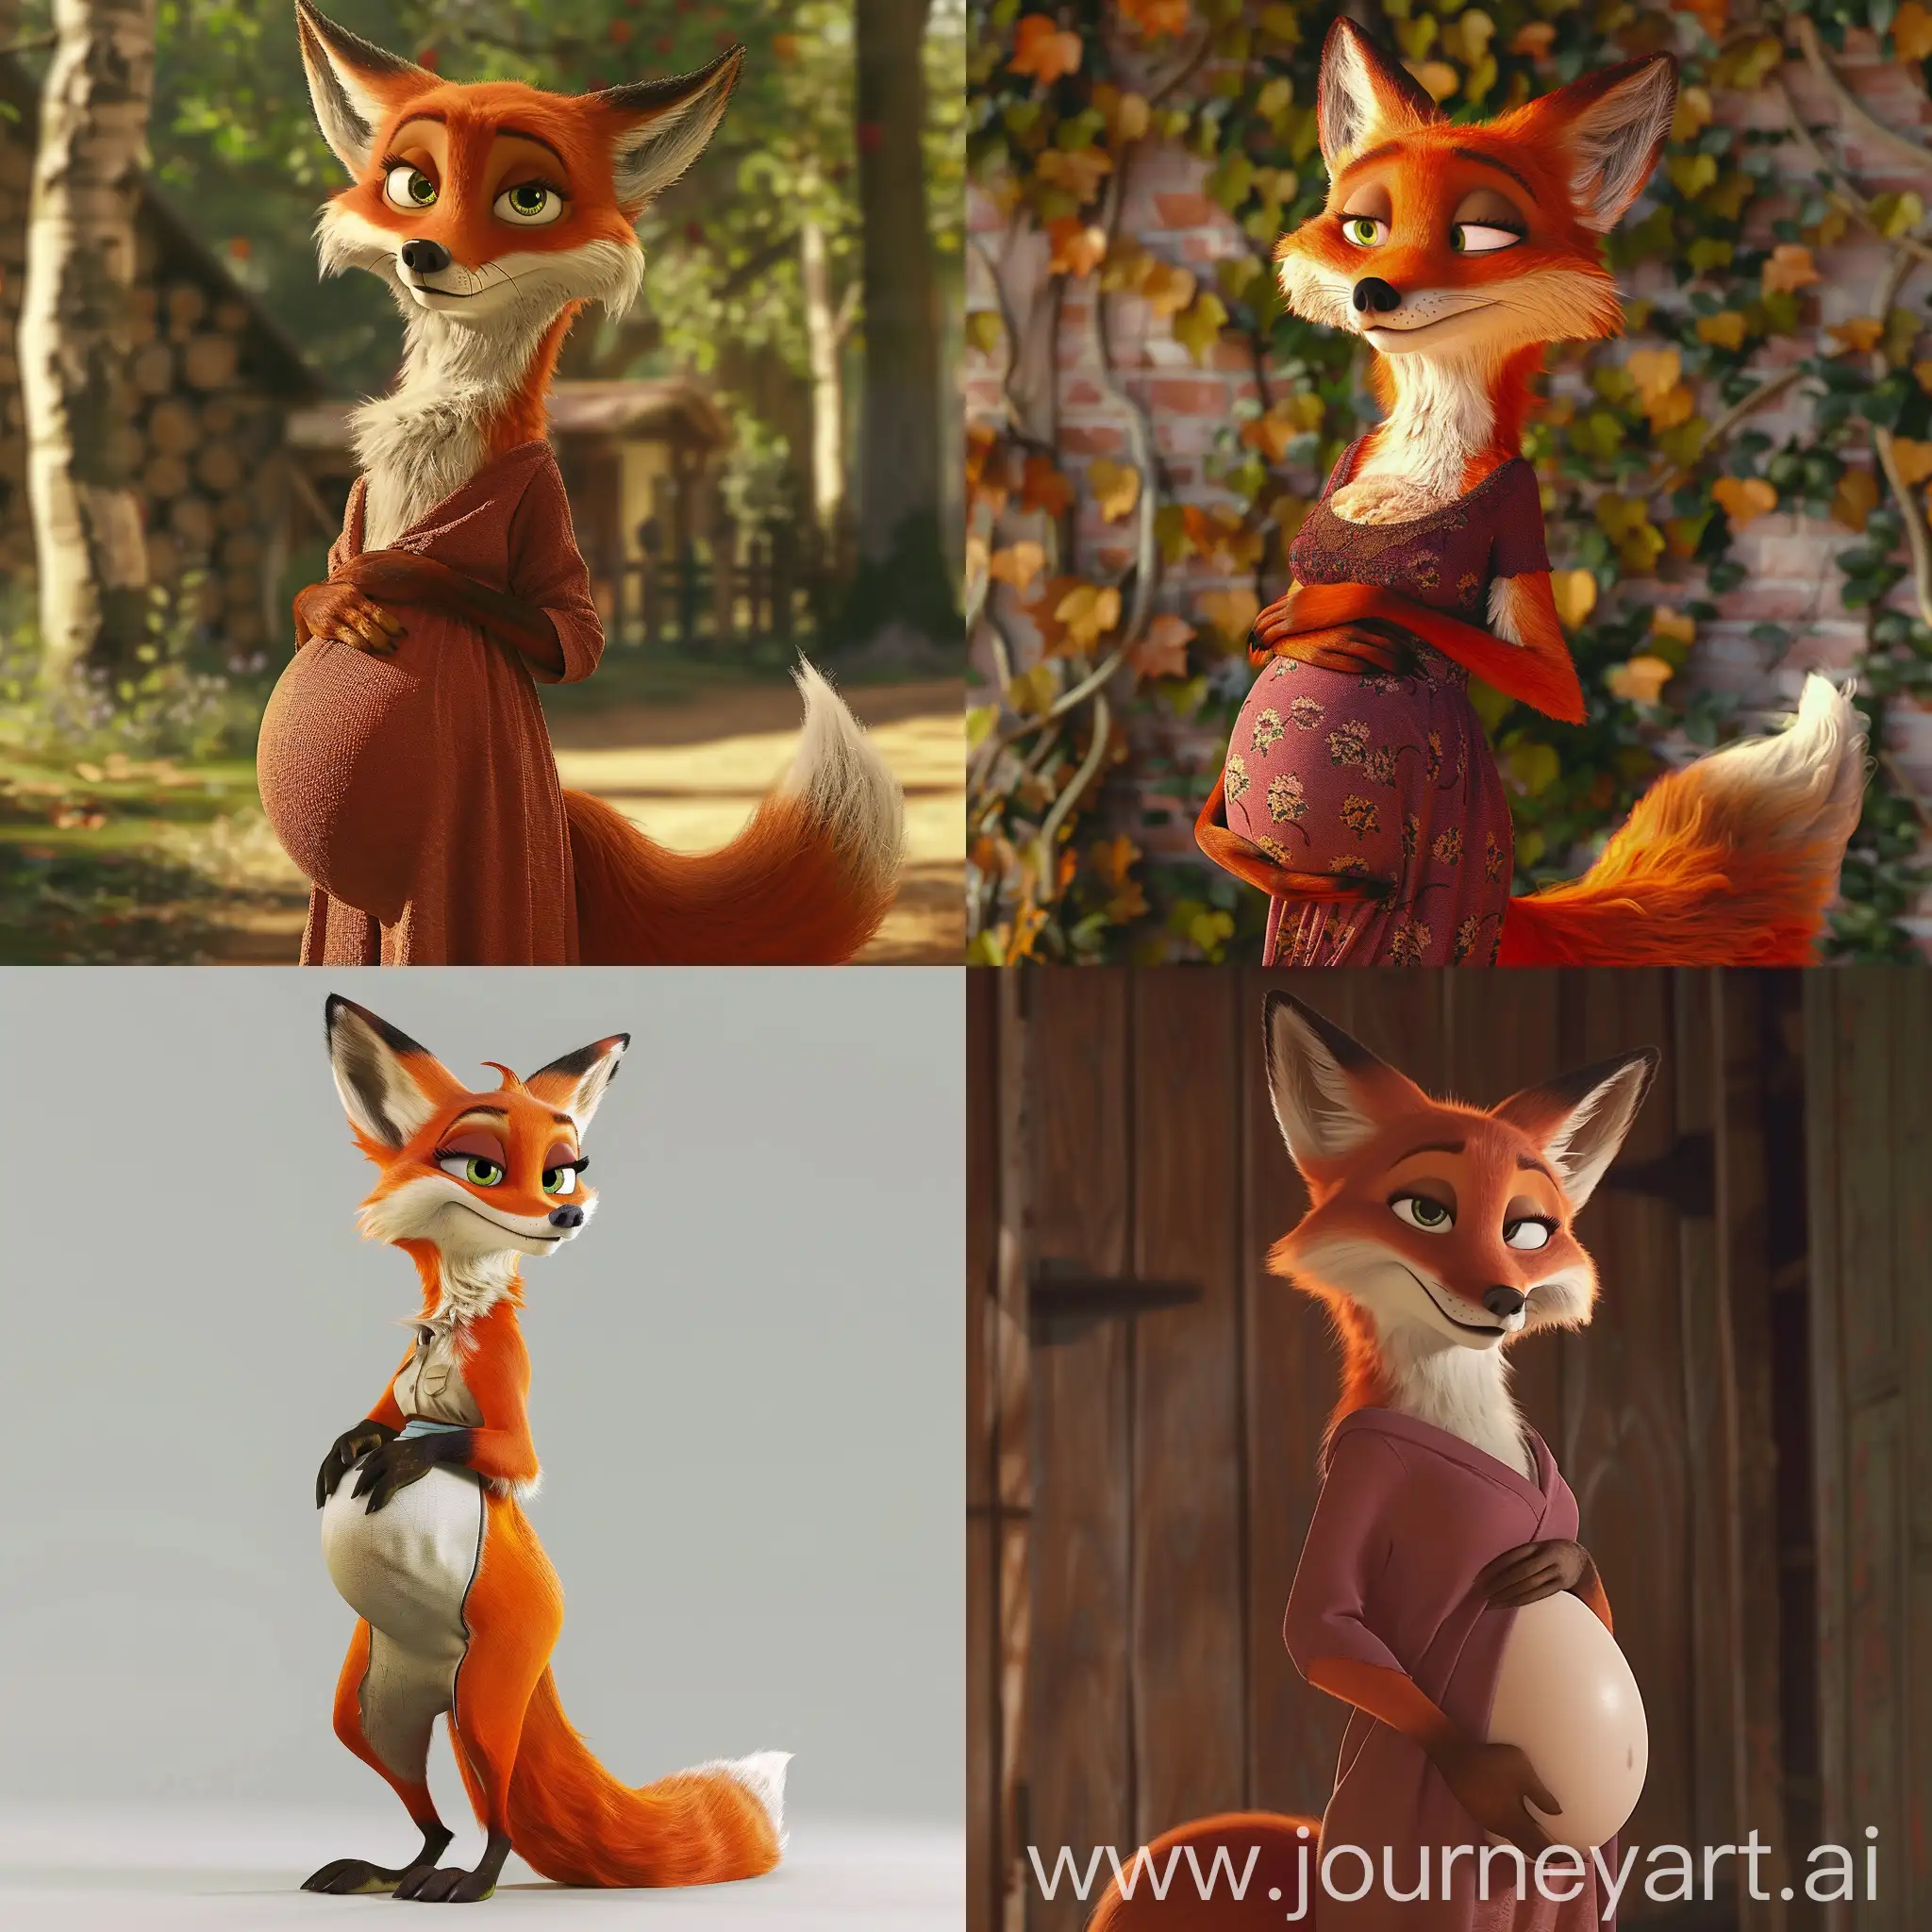 Expectant-Fox-Woman-Character-in-Whimsical-Pixar-Style